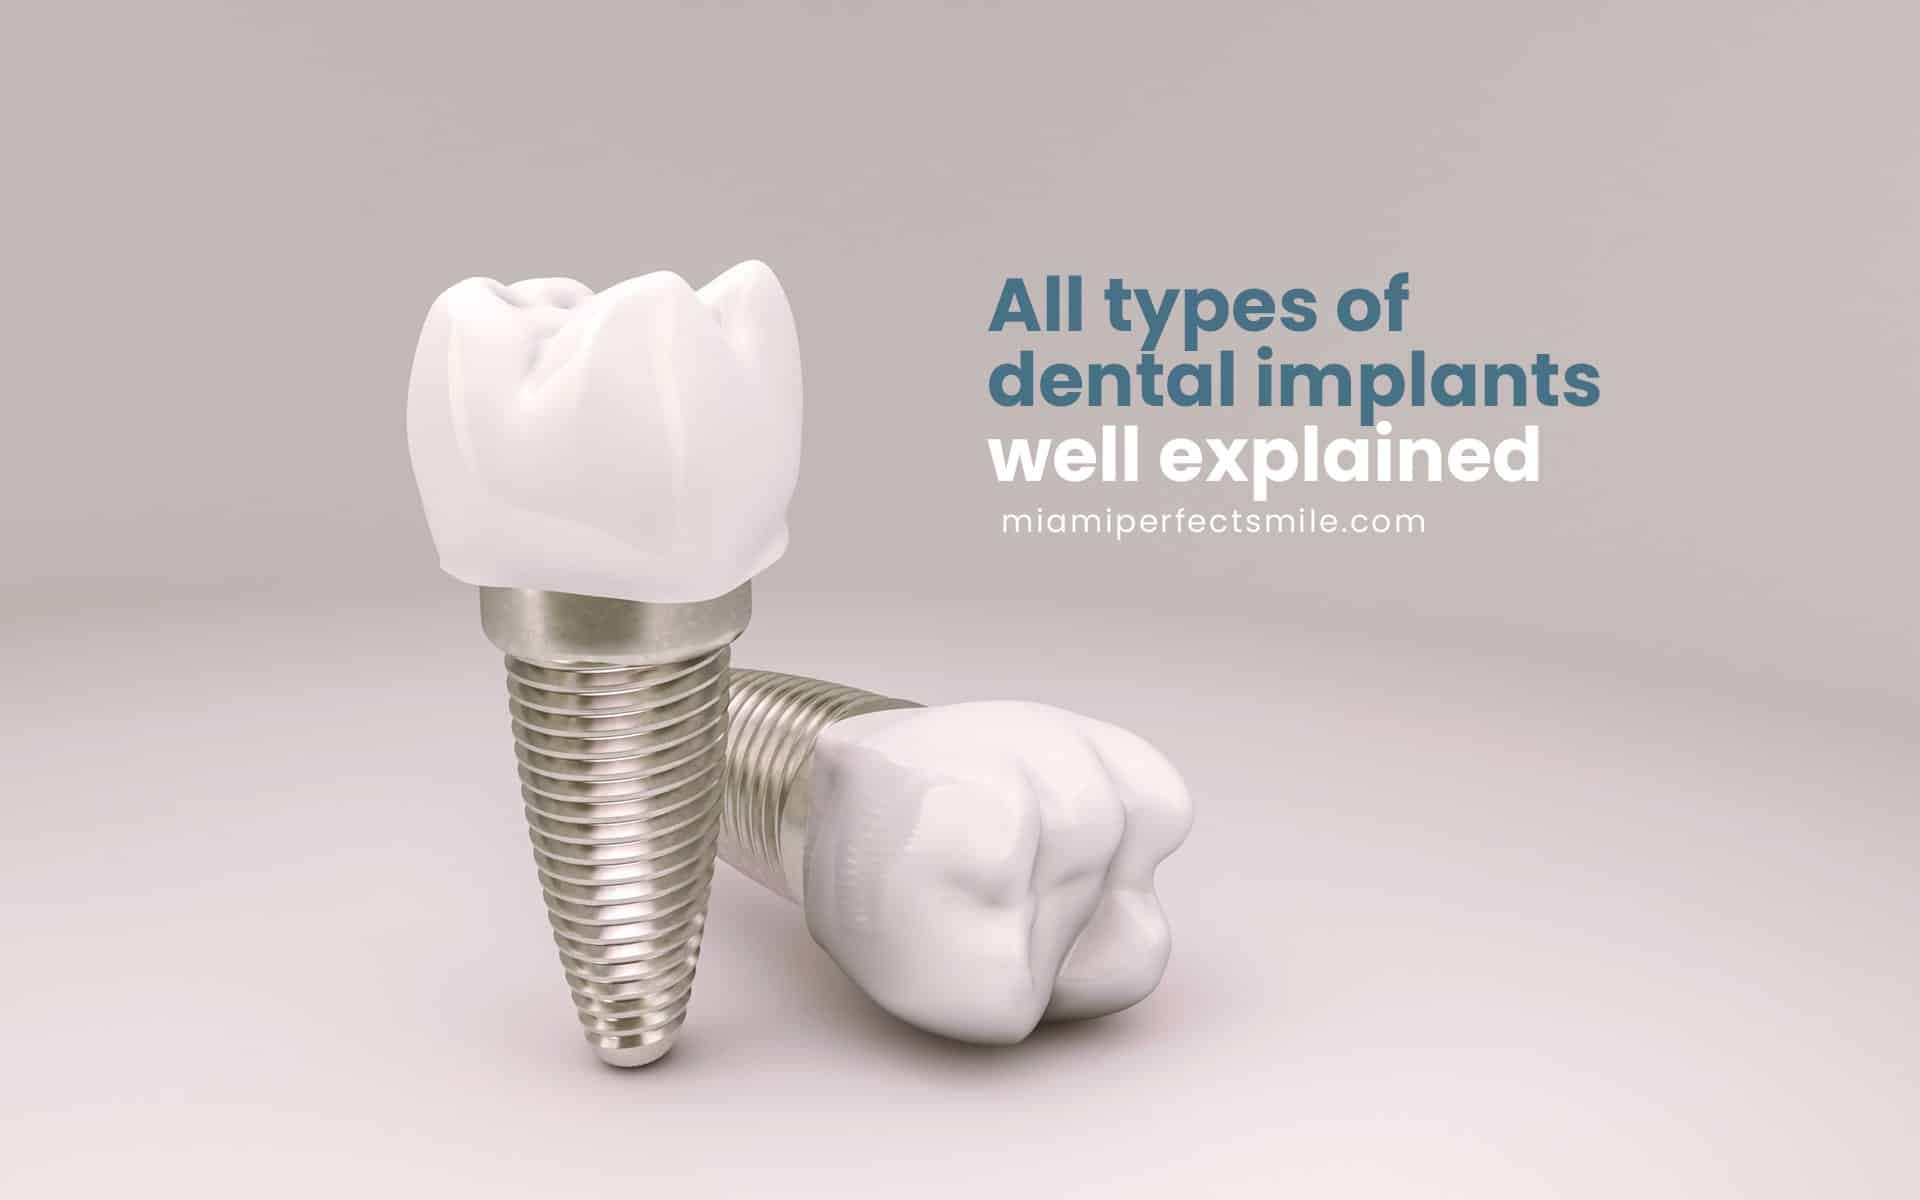 01 All types of dental implants well explained